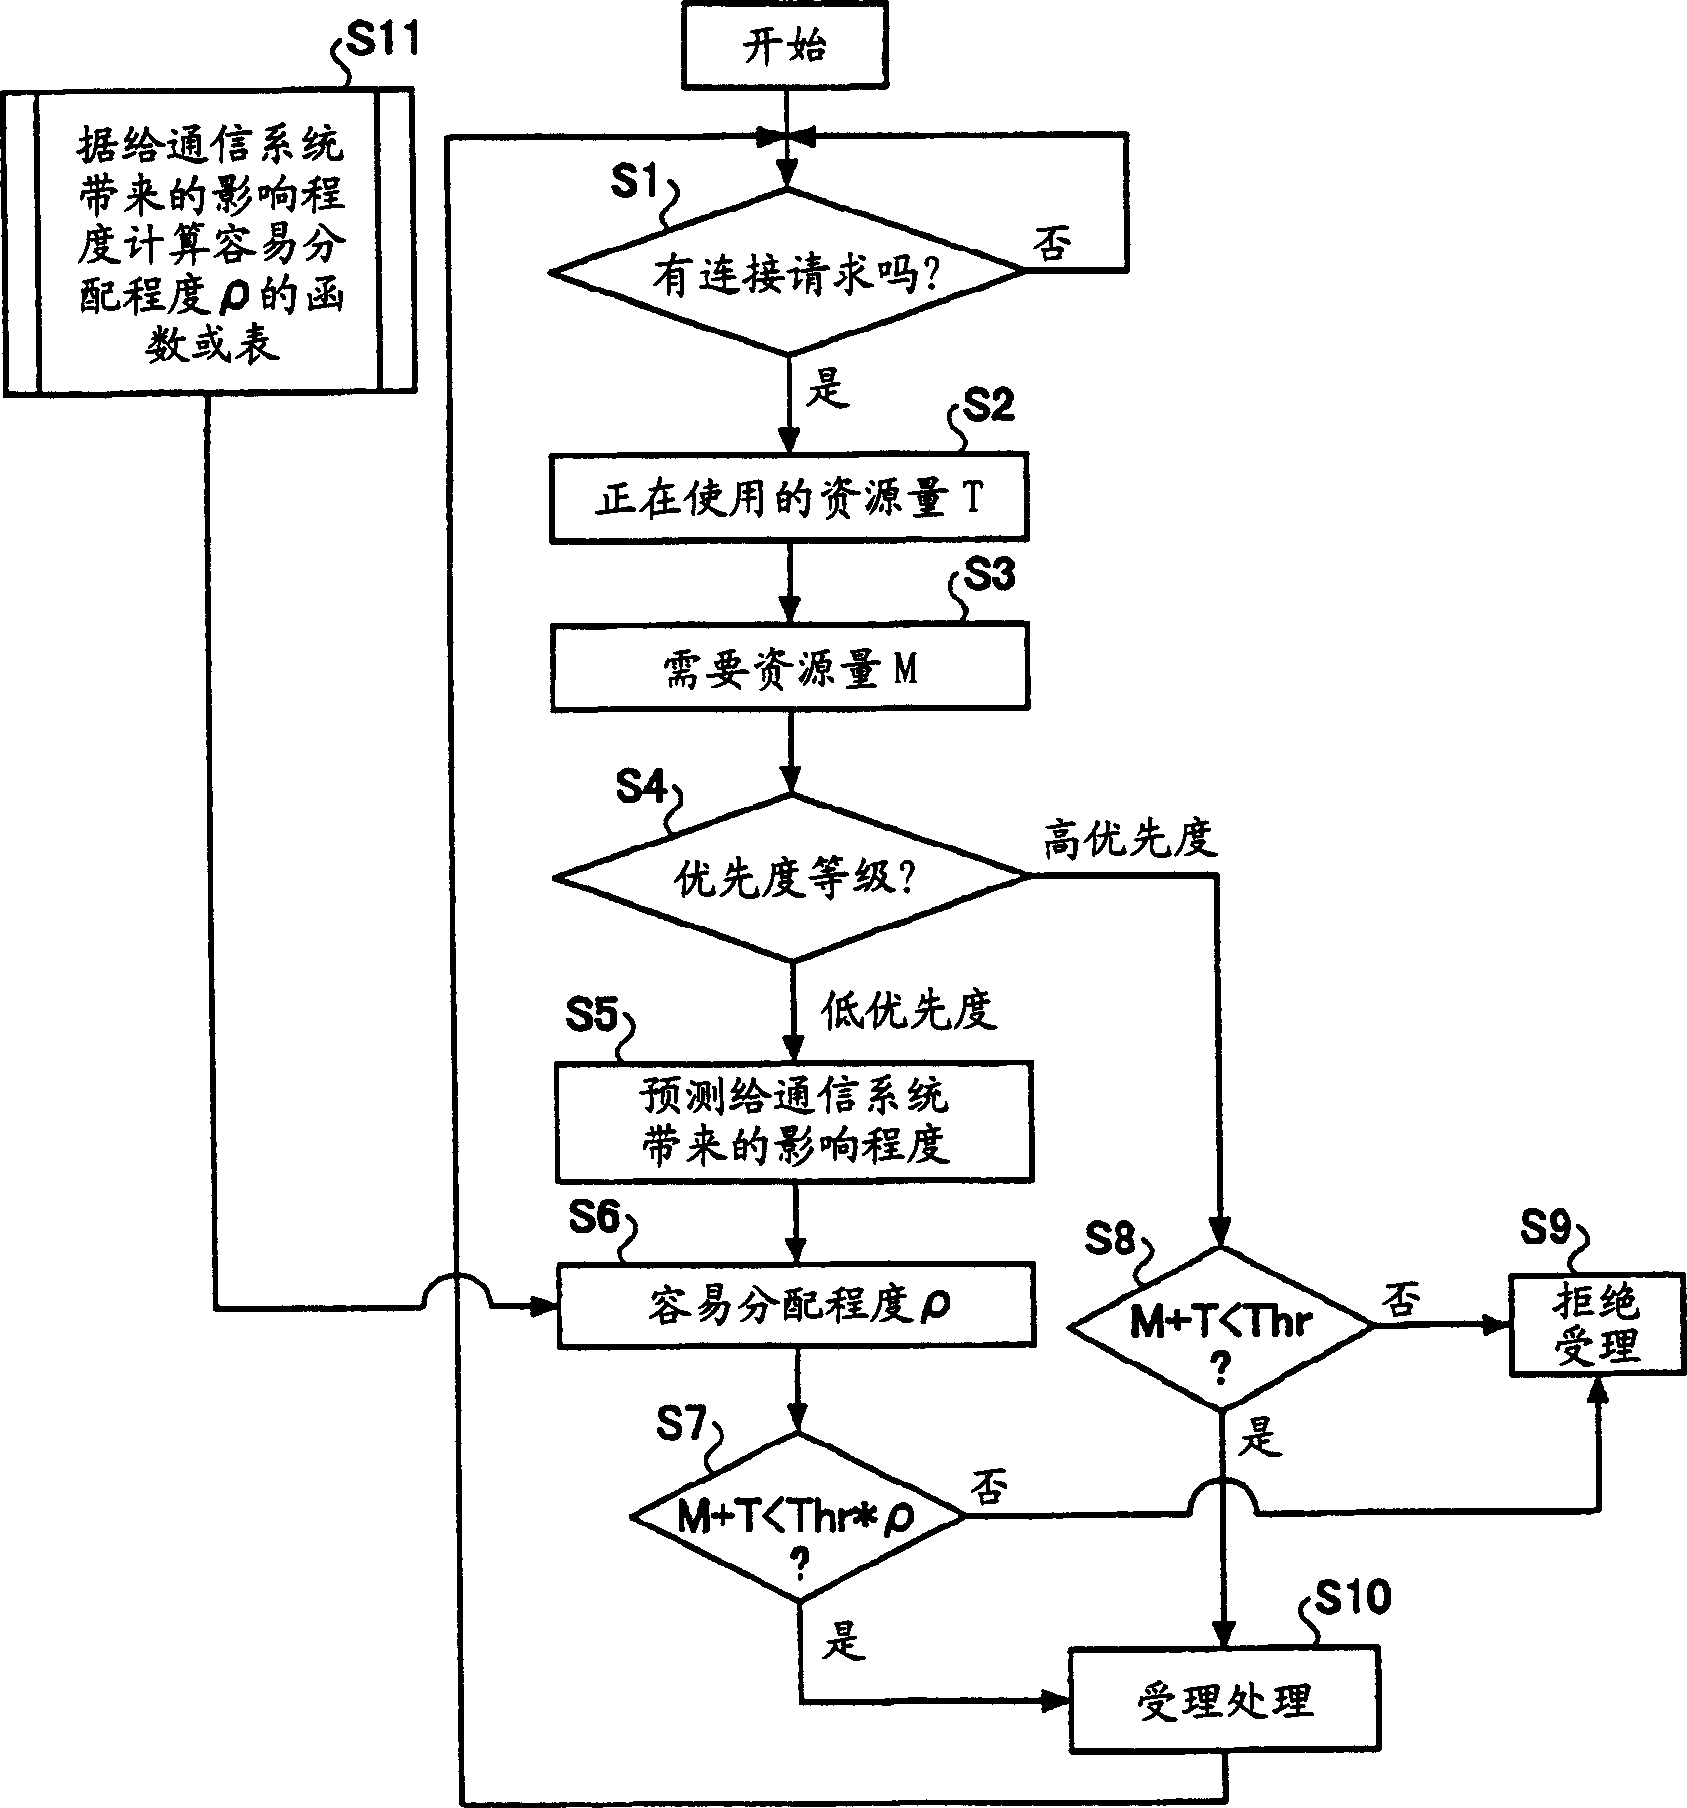 Calling acception controller and calling acception control method